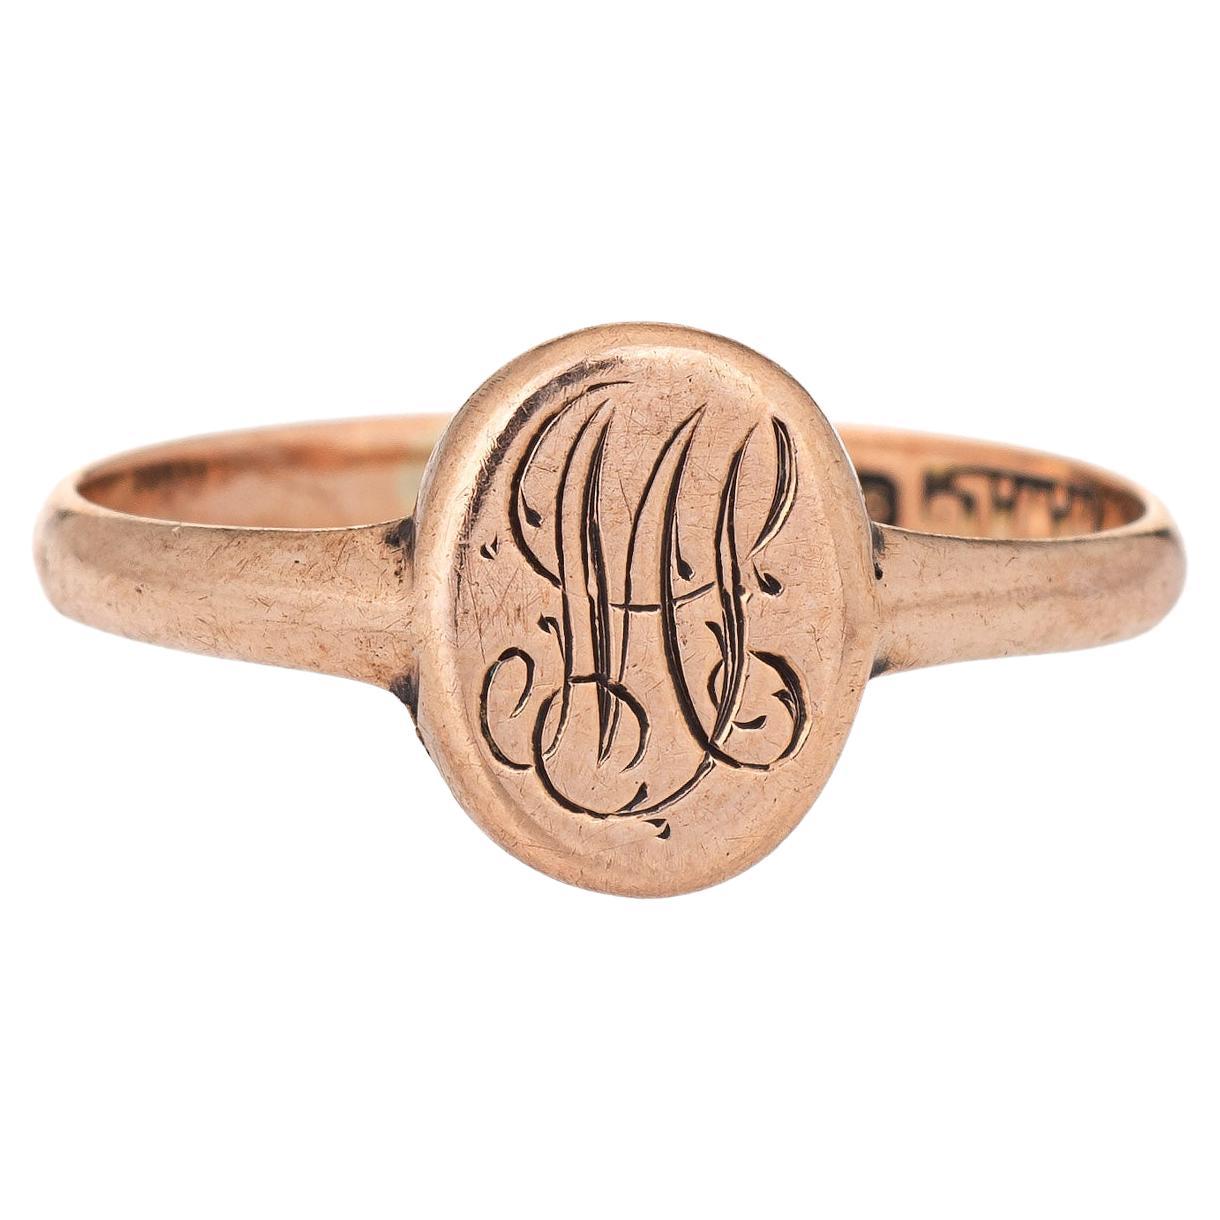 Vintage 1923 Art Deco Signet Ring Small Oval 9k Rose Gold Child Jewelry For Sale